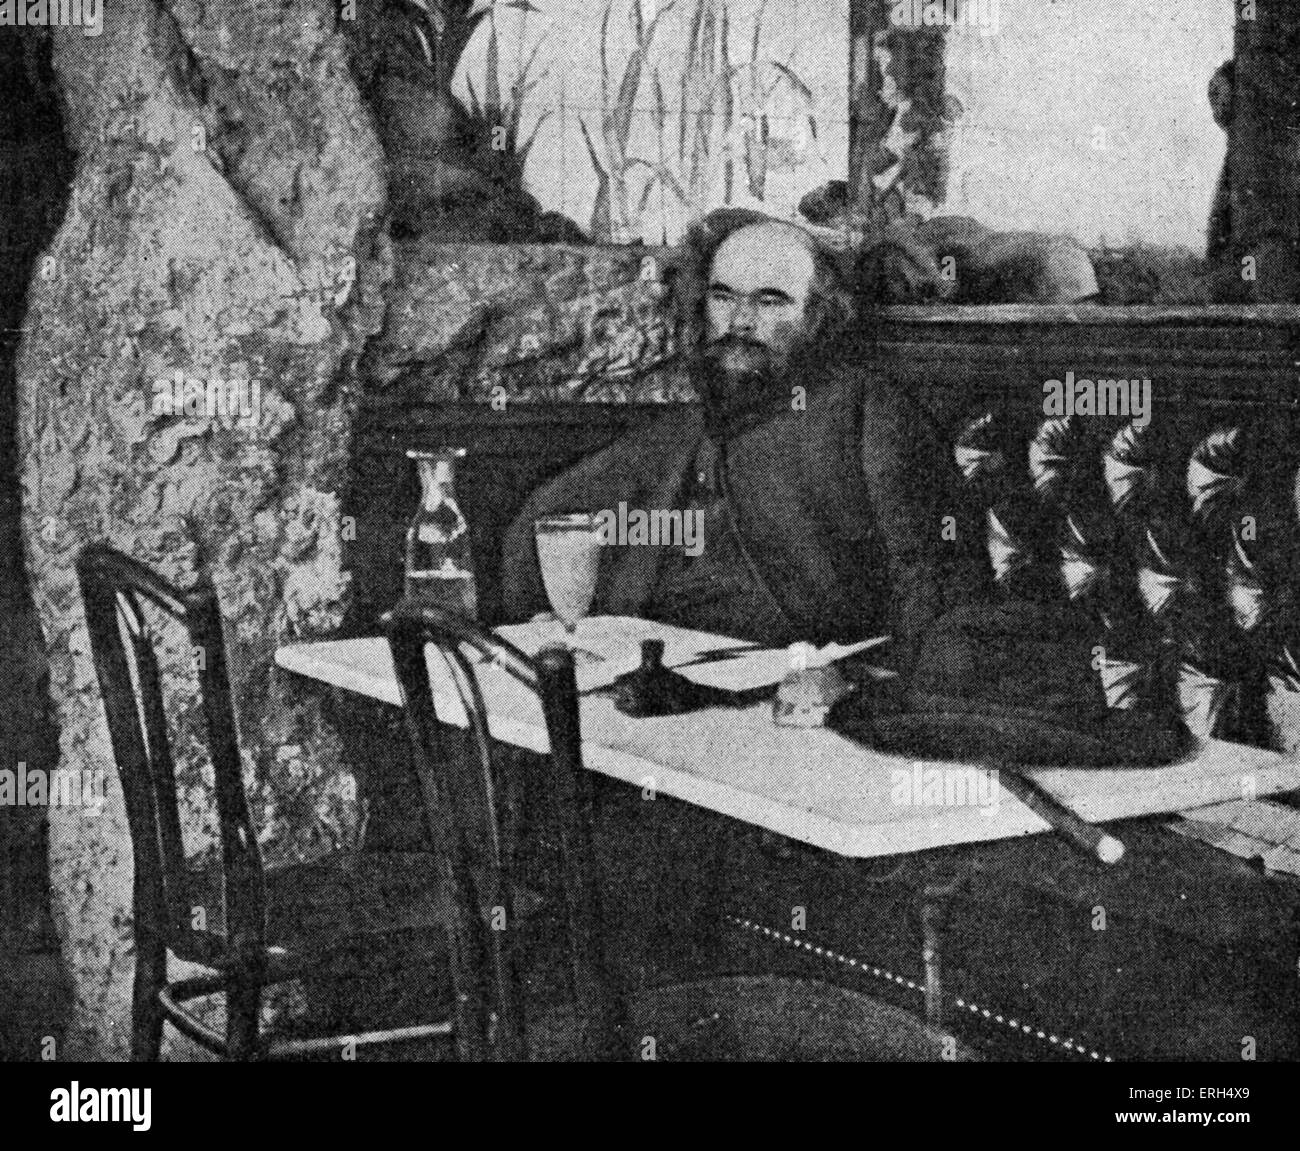 Paul Verlaine  - portrait in front of a glass of absinthe at the Café Procope, Paris, France.French poet, 1844 - 1896. Stock Photo